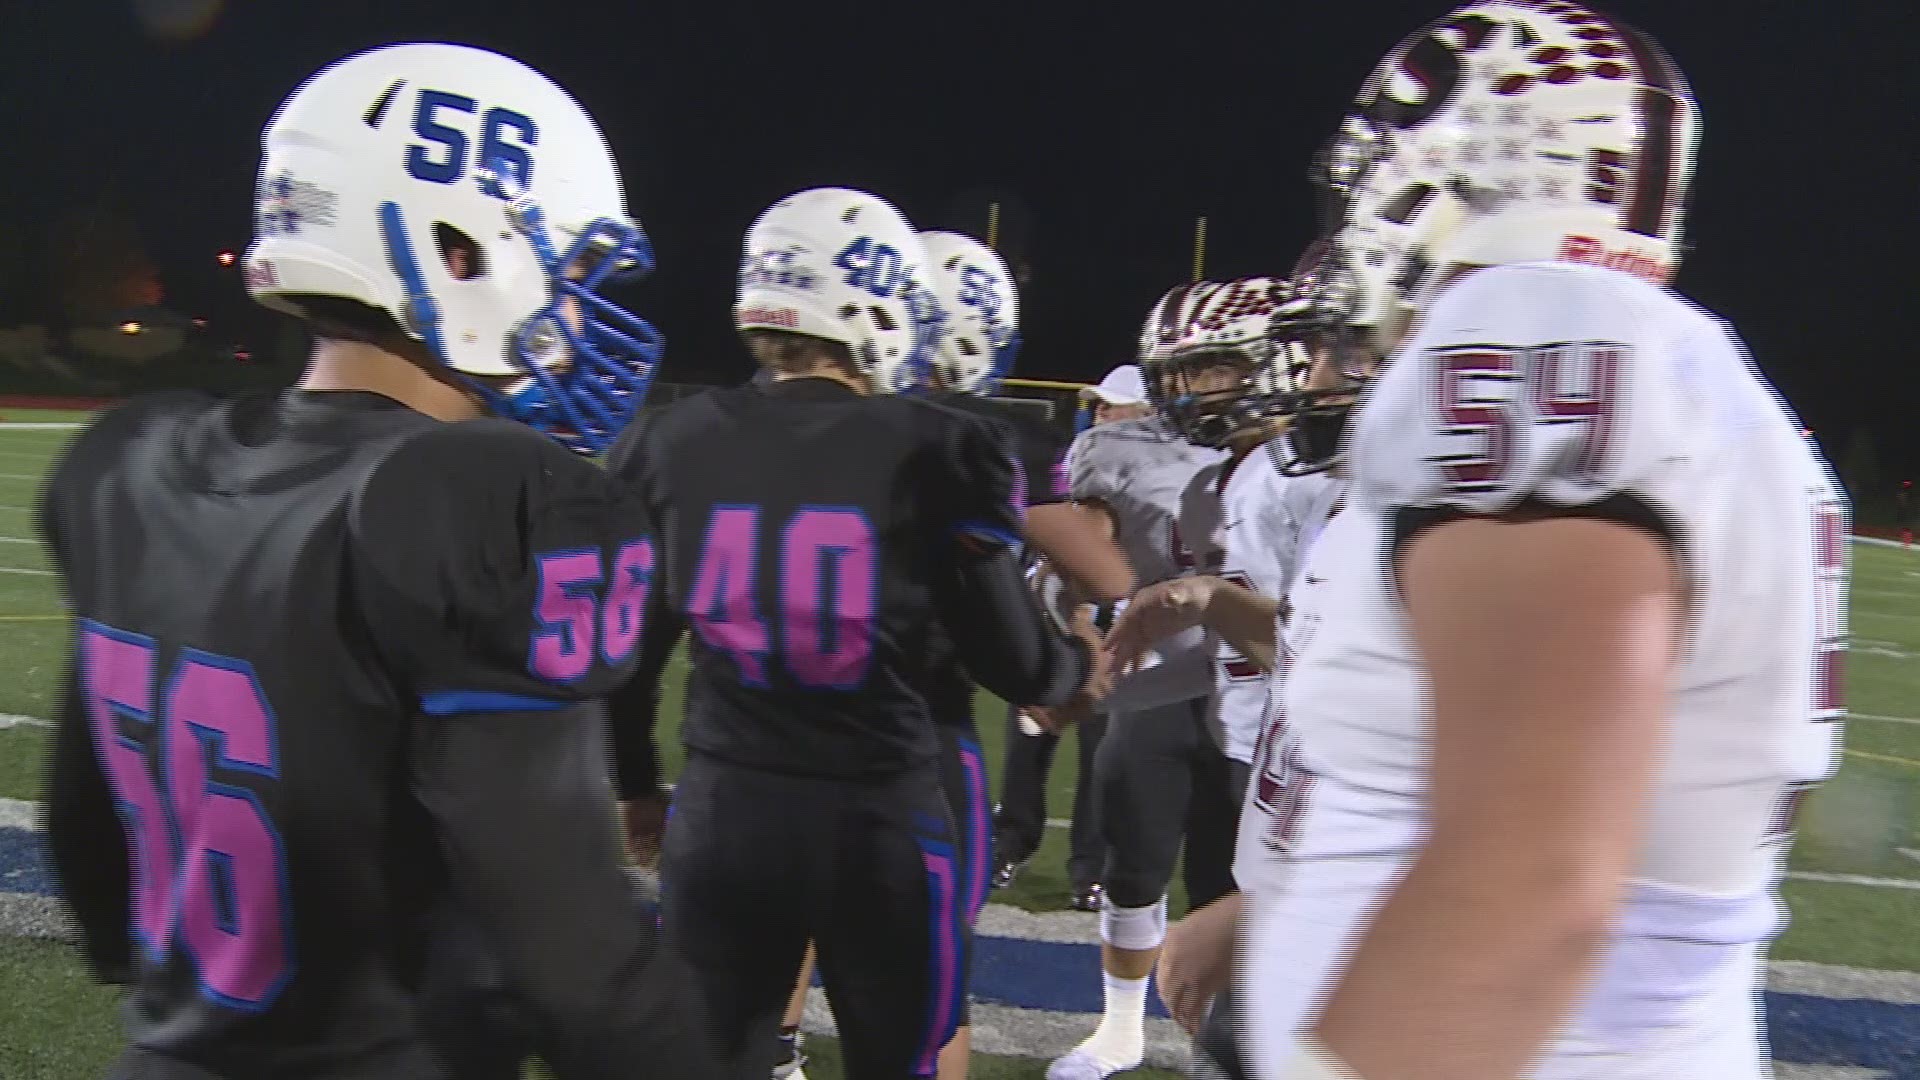 Highlights of Sherwood's 35-14 win over Newberg. Highlights are part of KGW's Friday Night Flights with Orlando Sanchez.